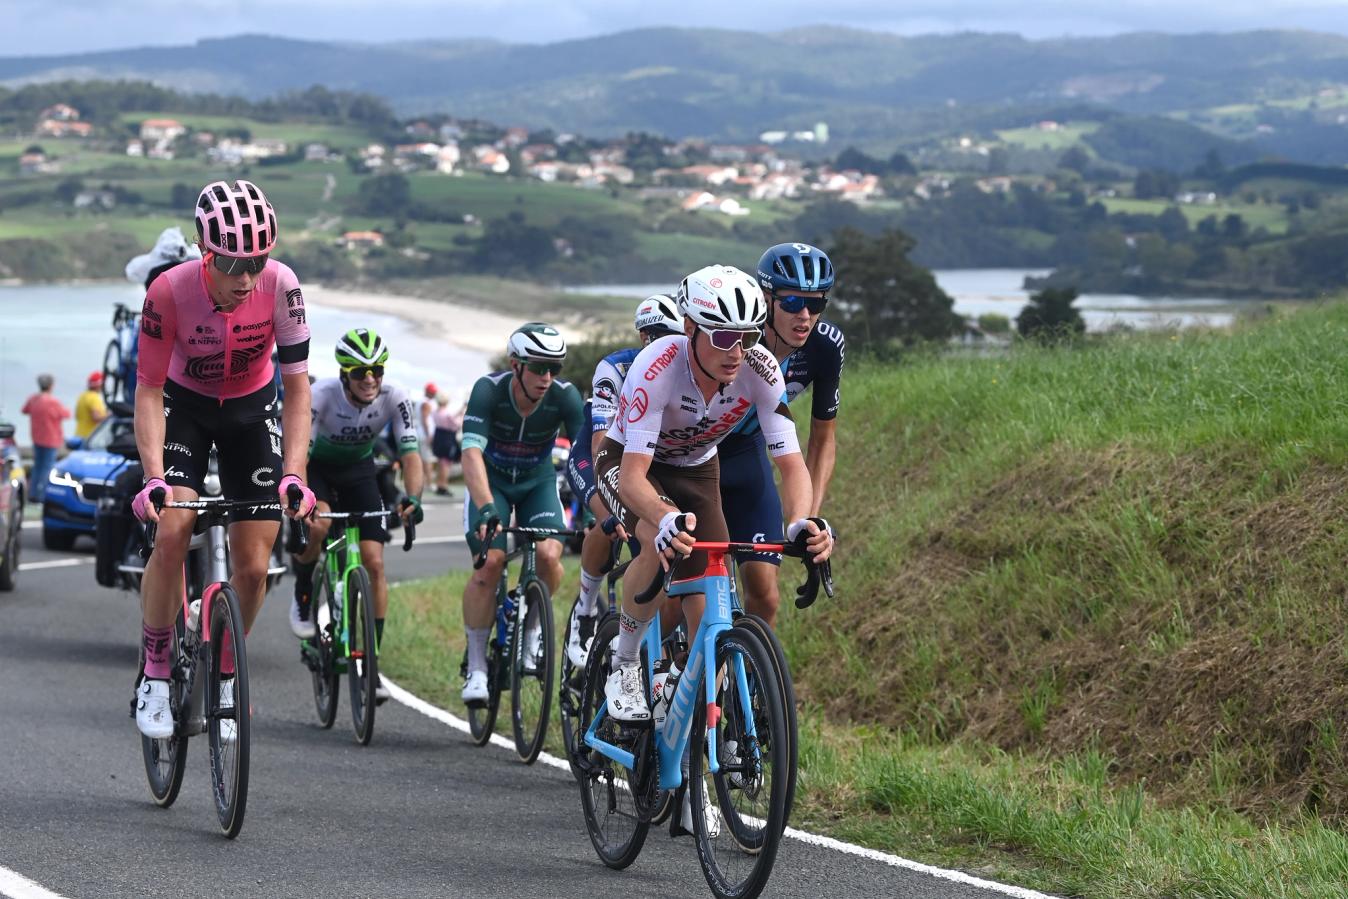 The definitive 'breakaway of the day' was eventually a six-rider move